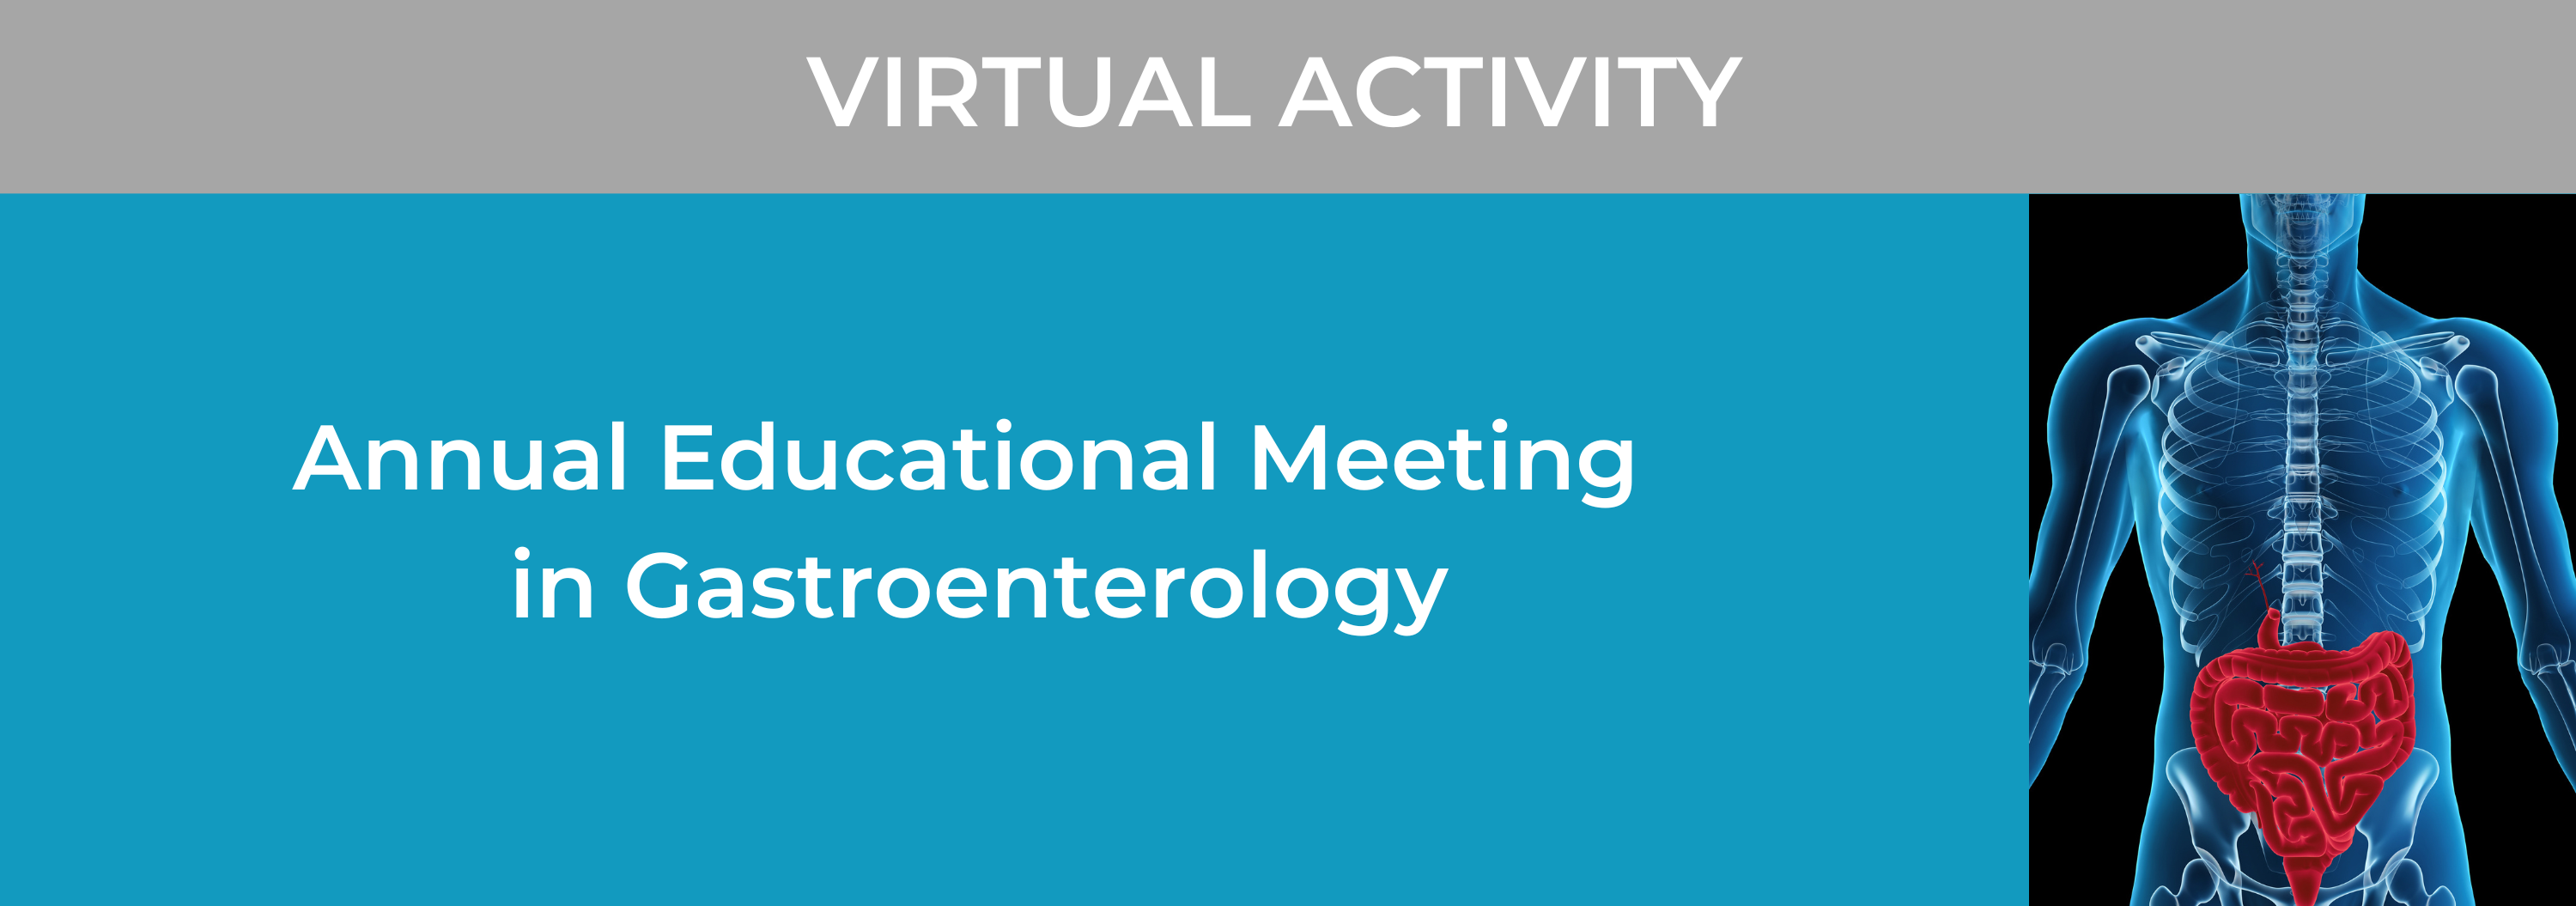 23rd Annual Educational Meeting in Gastroenterology Banner